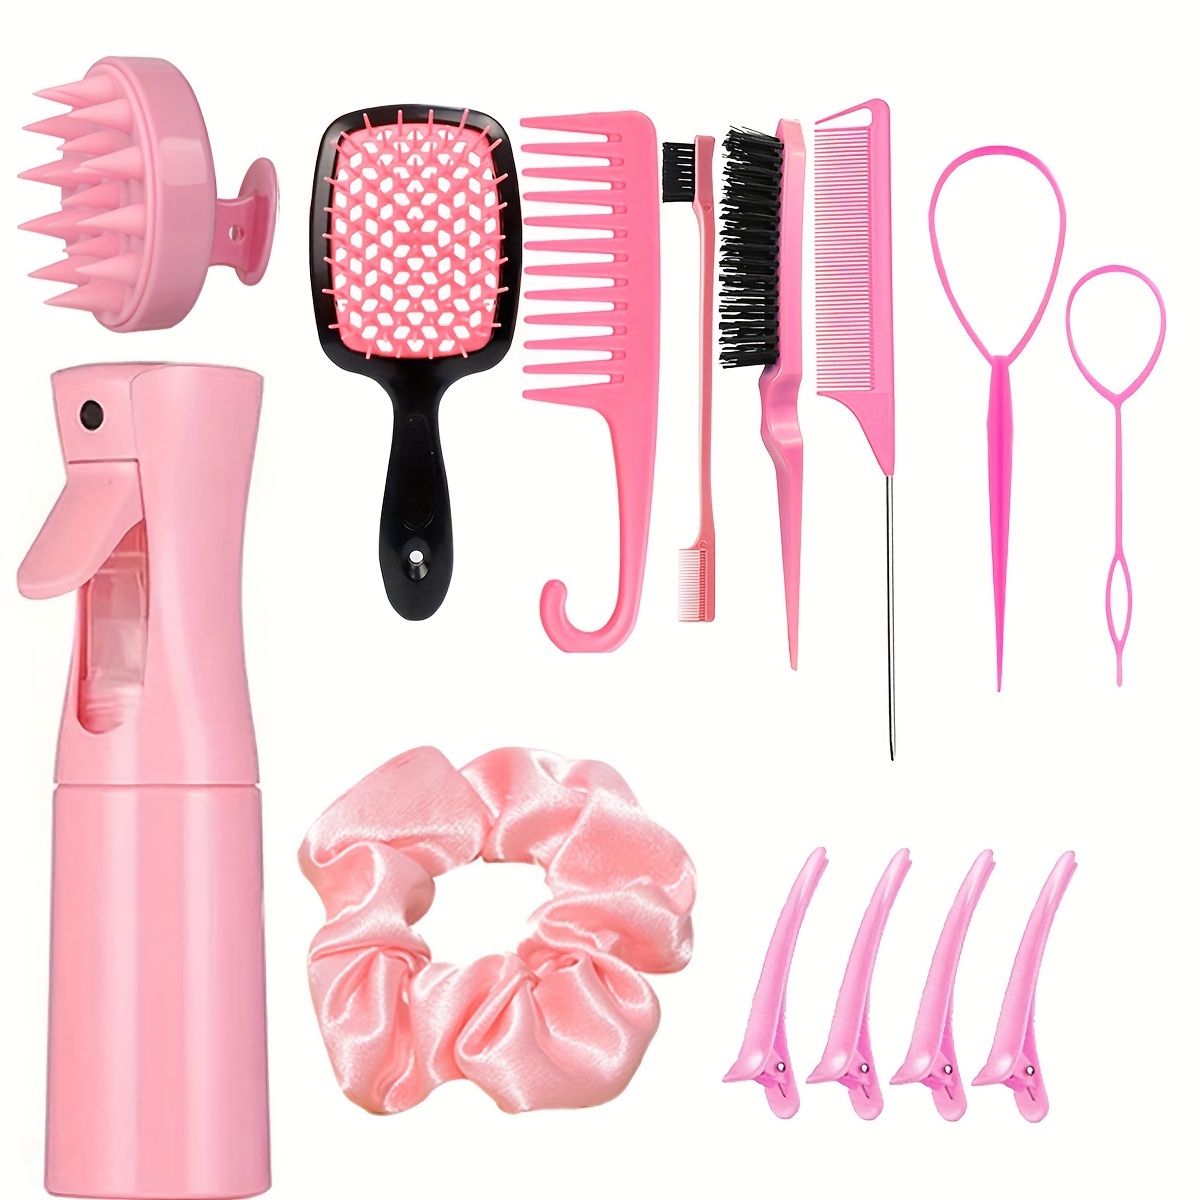 

14-piece Professional Hair Styling Kit: Quick-dry Spray, Smoothing & Precision Combs, Braiding Tools - Complete Salon-quality Set For All Hair Types